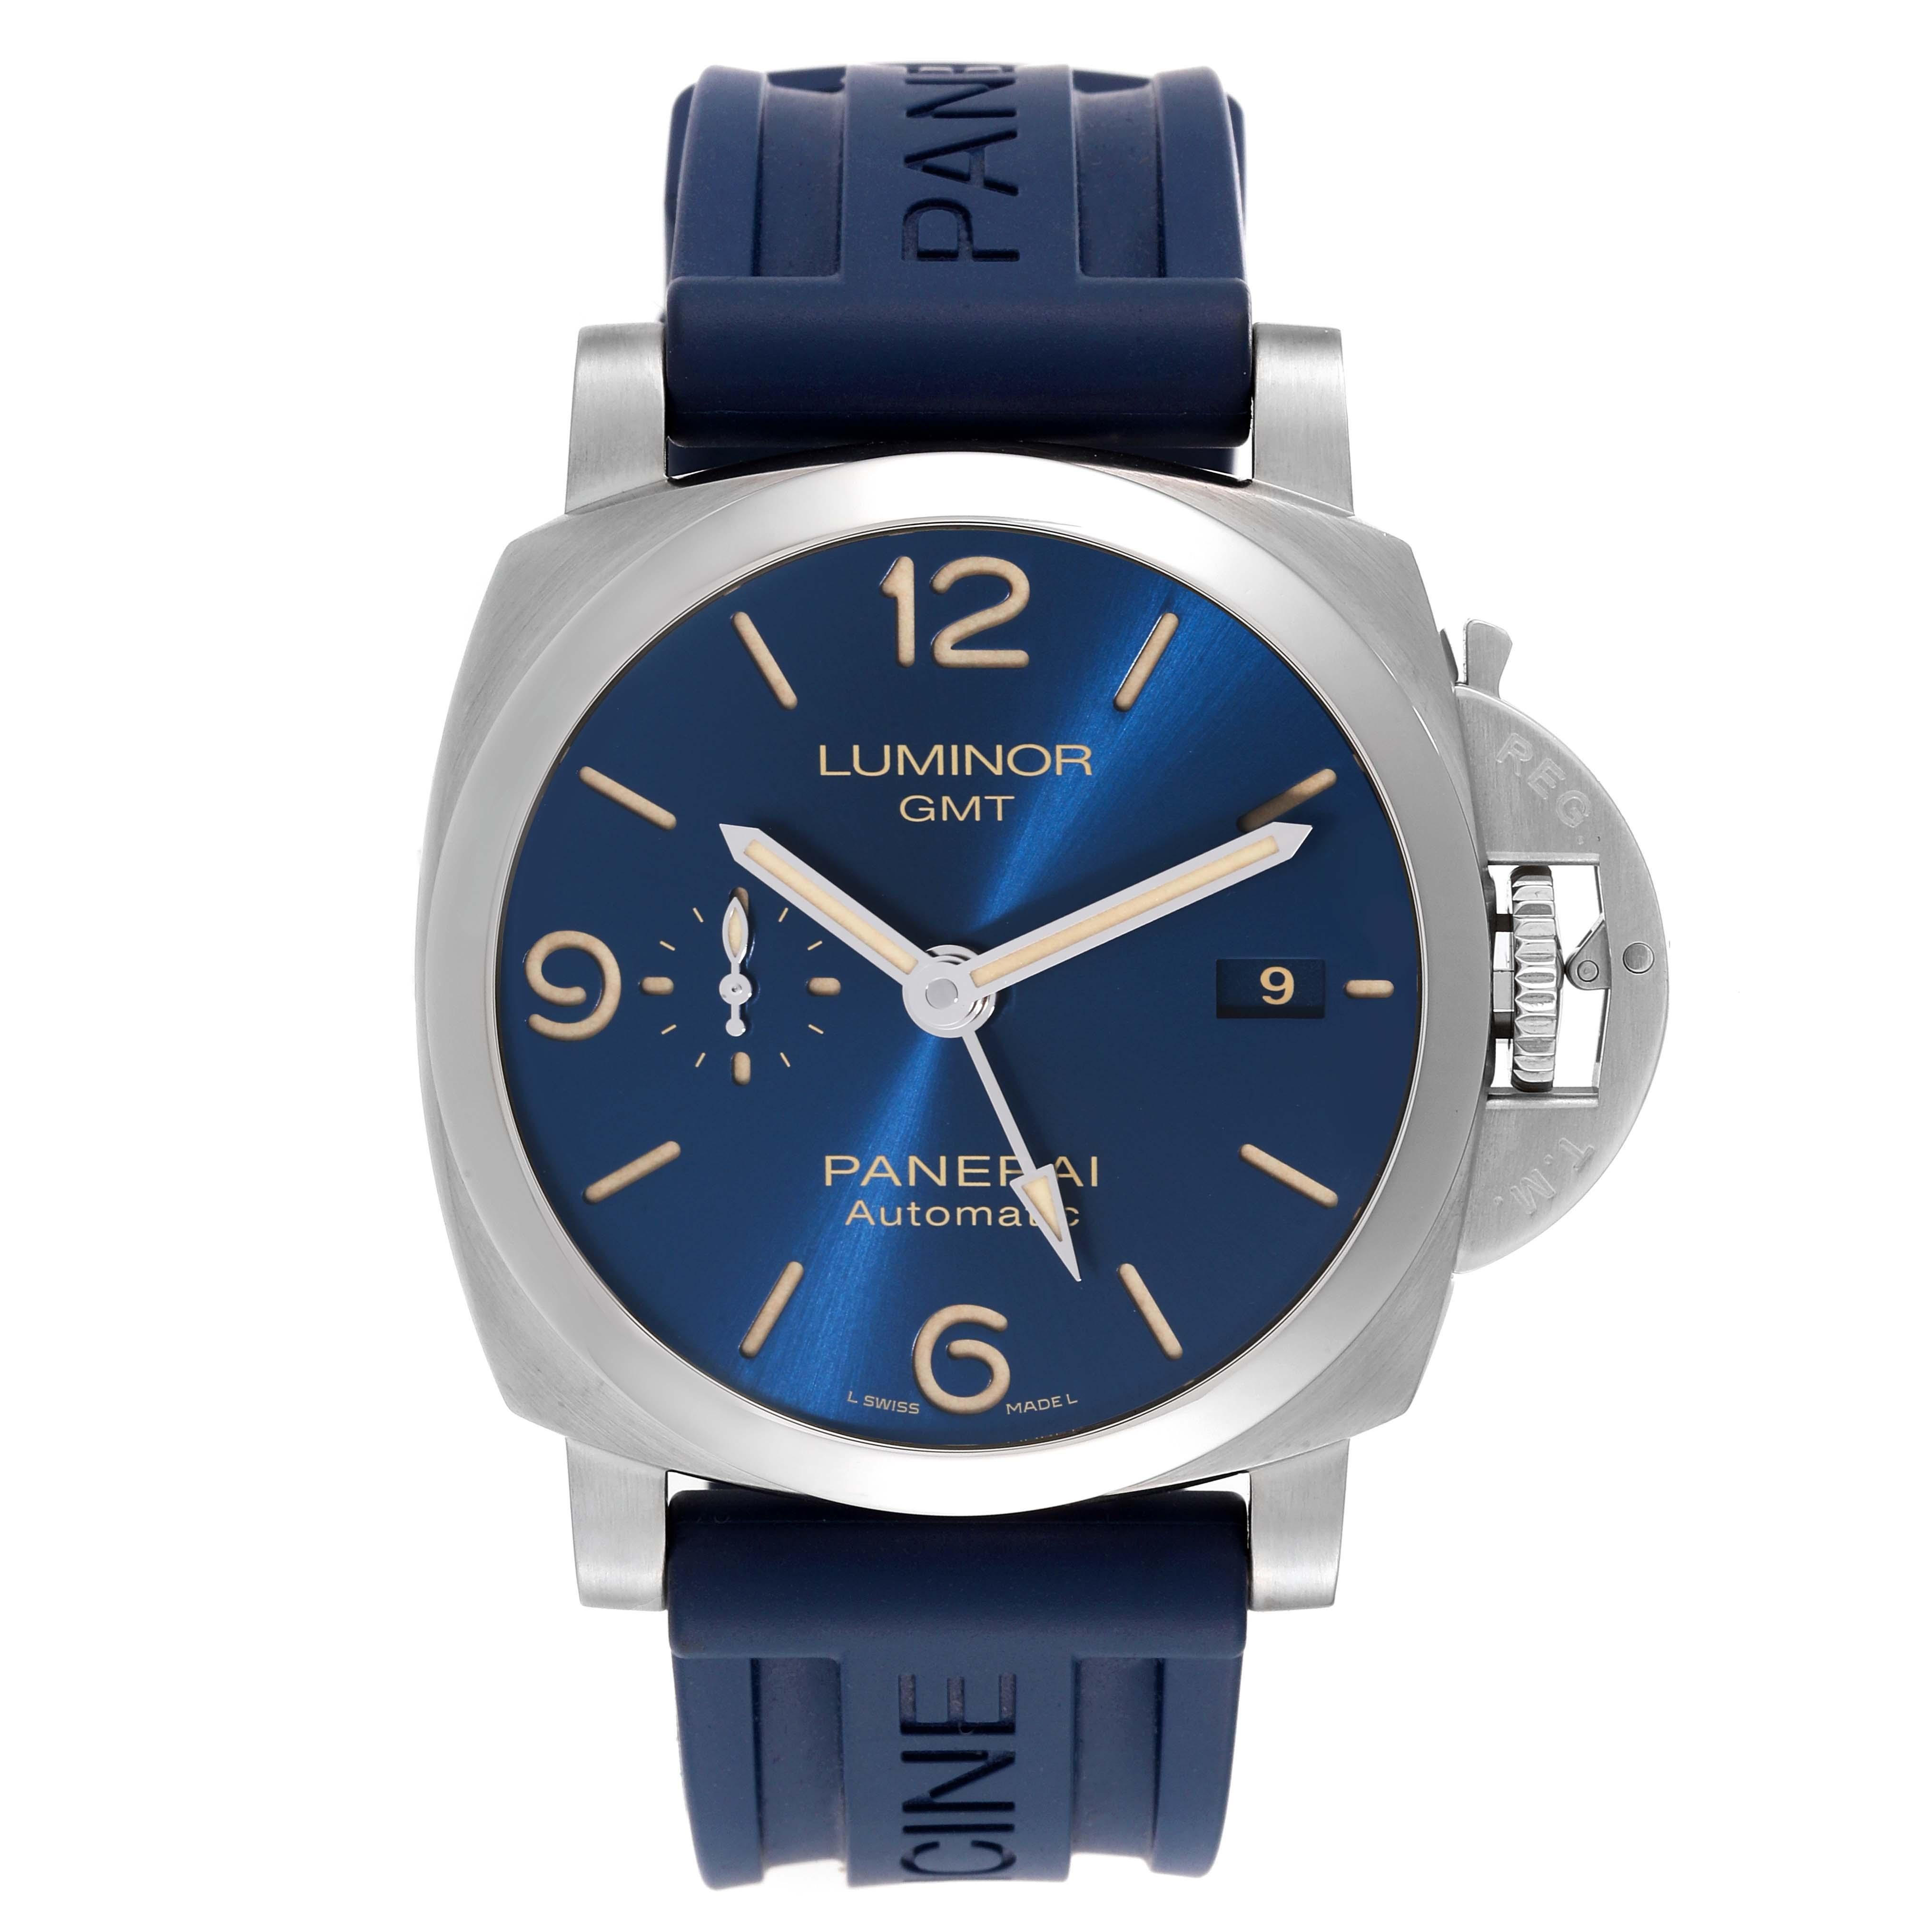 Panerai Luminor 1950 3 Days GMT Blue Dial Steel Mens Watch PAM01033 Box Card. Automatic self-winding movement. Two part cushion shaped stainless steel case 44.0 mm in diameter. Exhibition transparent sapphire crystal caseback. Polished Panerai